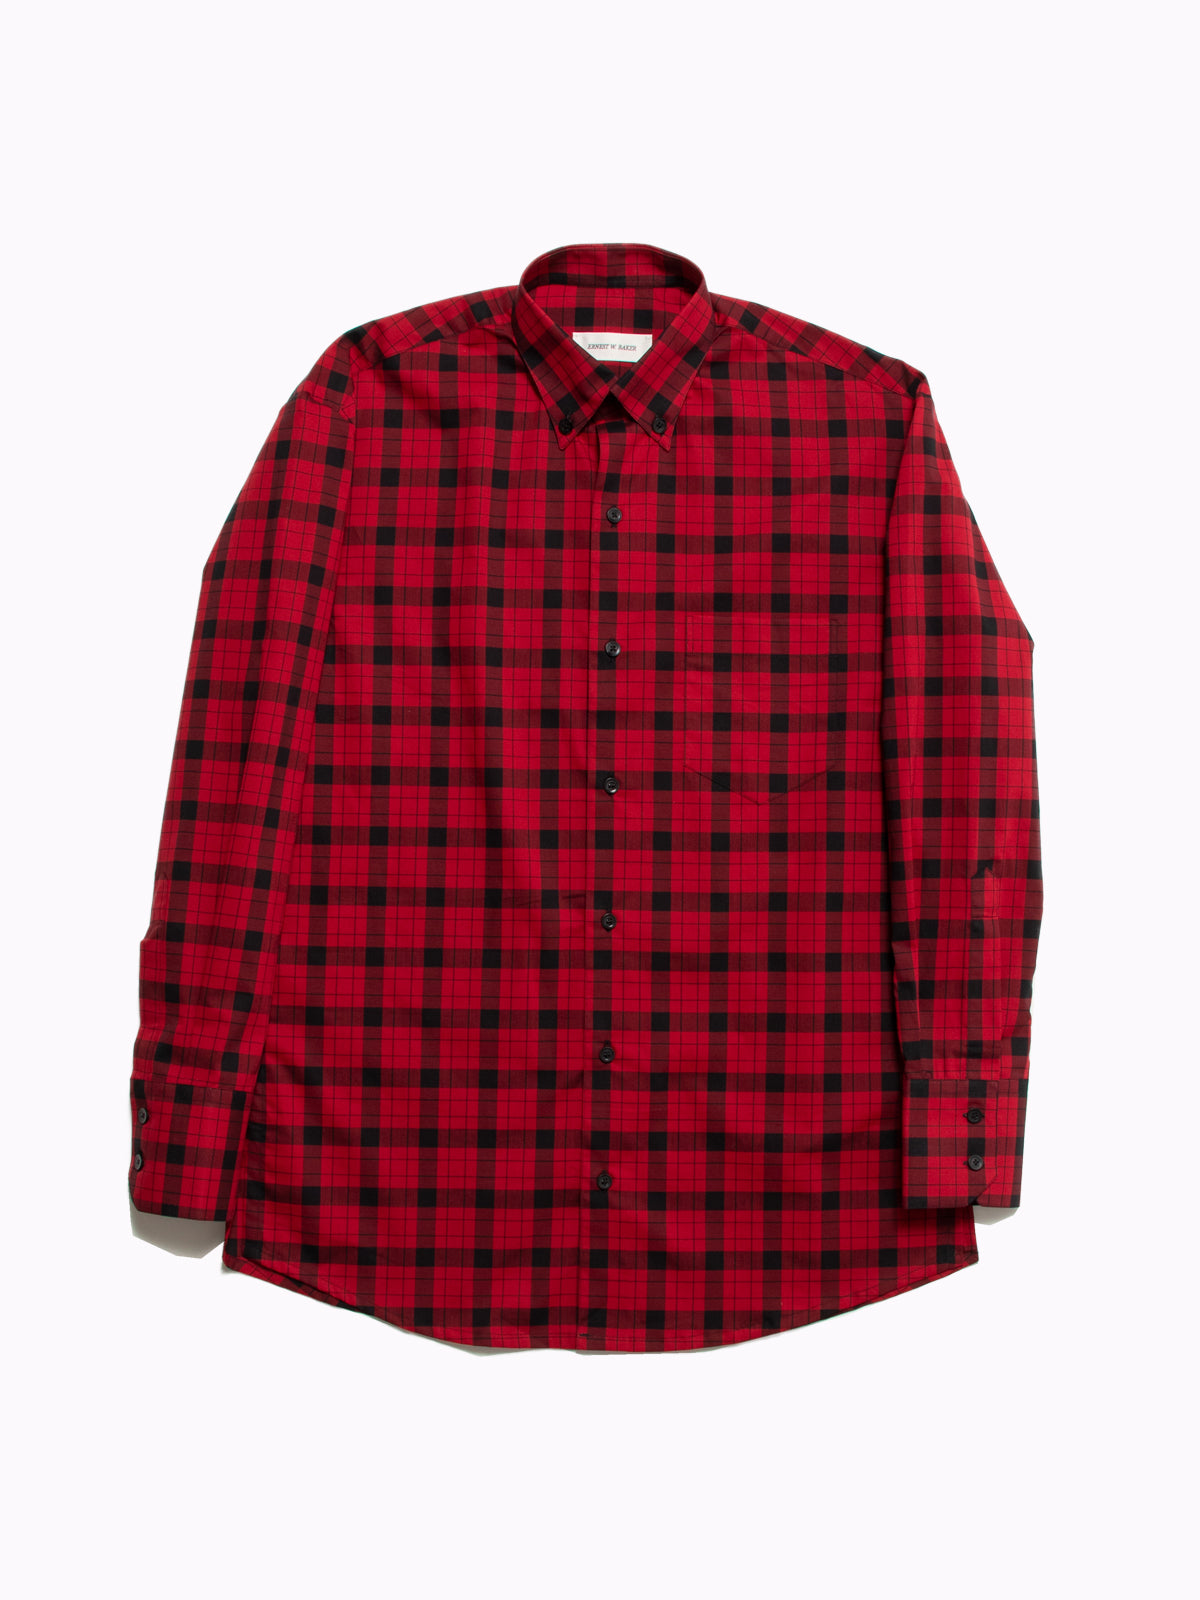 CLASSIC SHIRT (RED CHECK) - Baby's all right